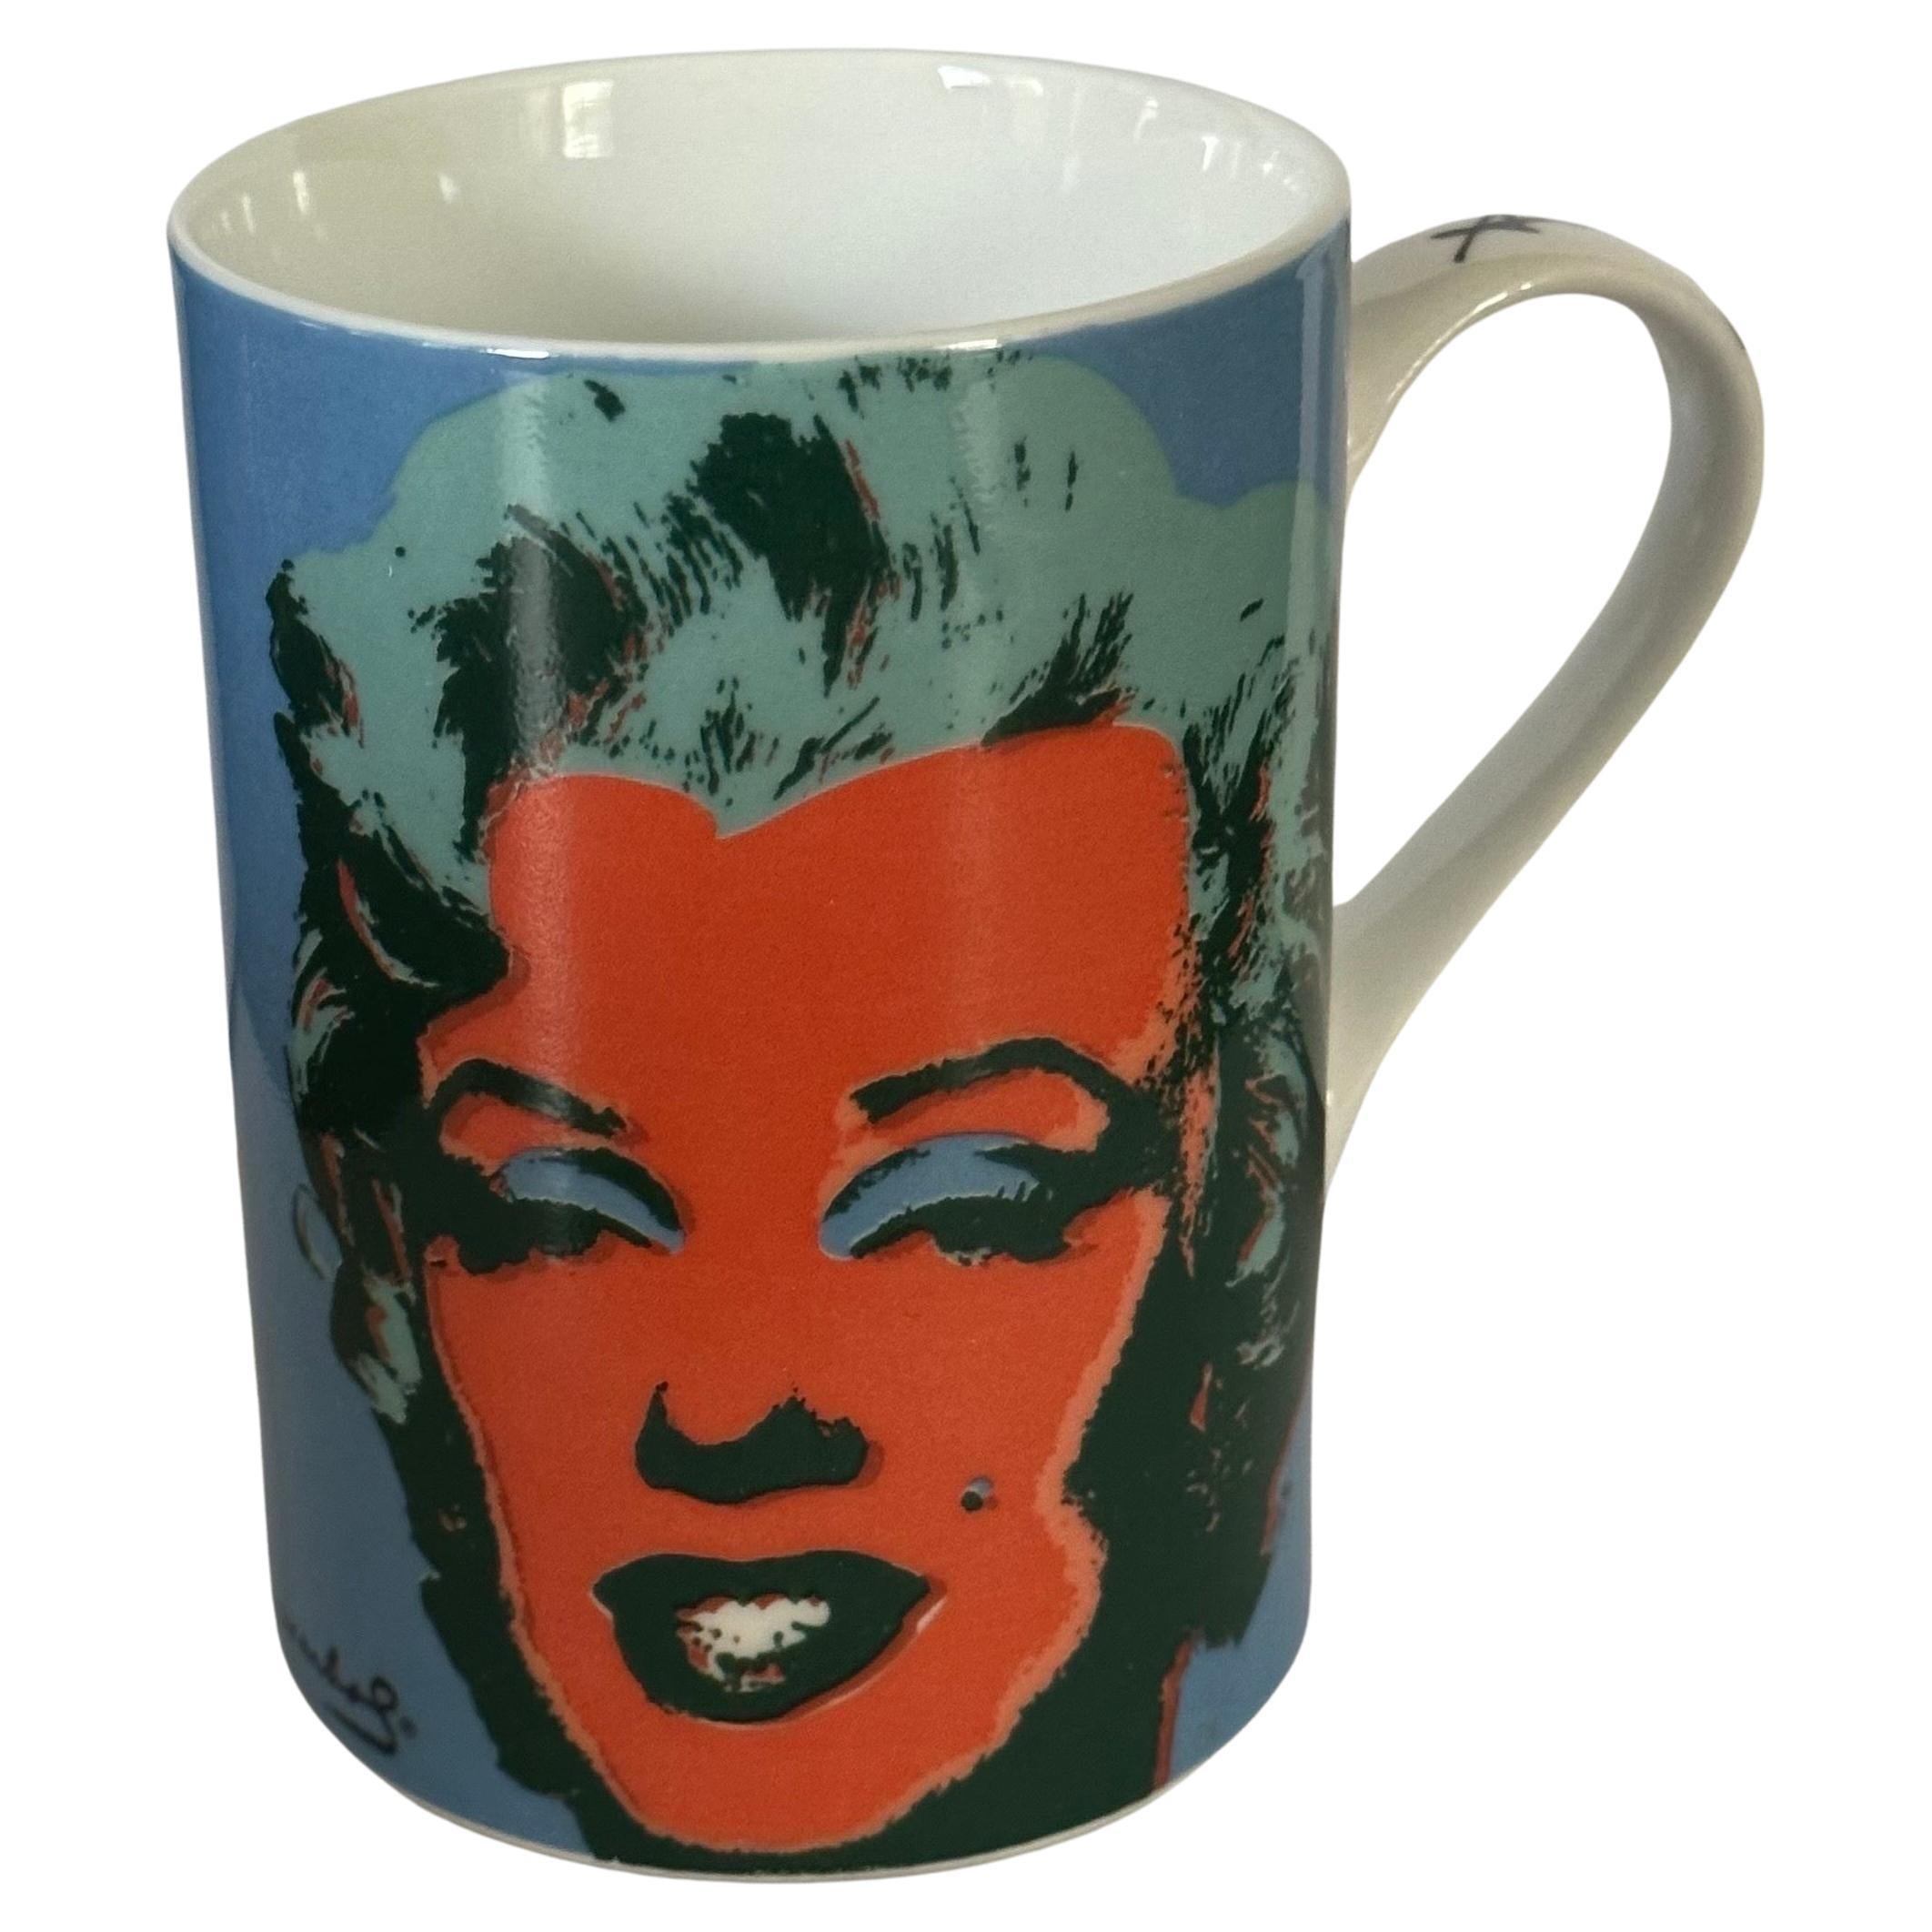 Set of Four Marilyn Monroe Ceramic Coffee Mugs in Box by Andy Warhol for Block  For Sale 1